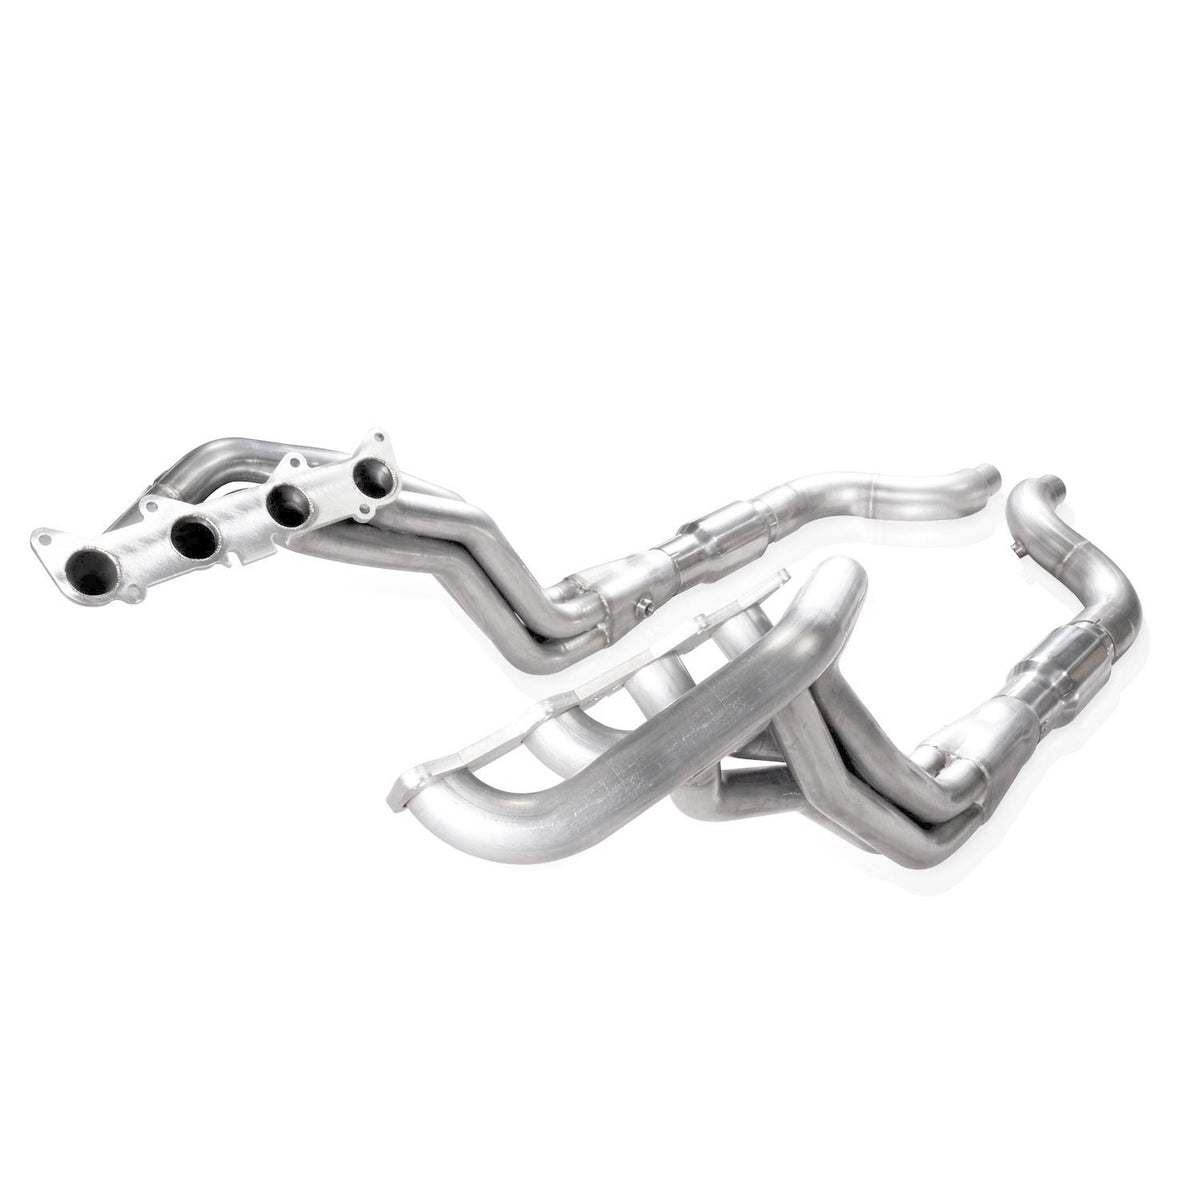 STAINLESS WORKS Mustang GT 5.0L 2015-2020 Headers w/ Factory Connect &amp; Catalytic Converter (2015-2020 GT 5.0L ONLY)